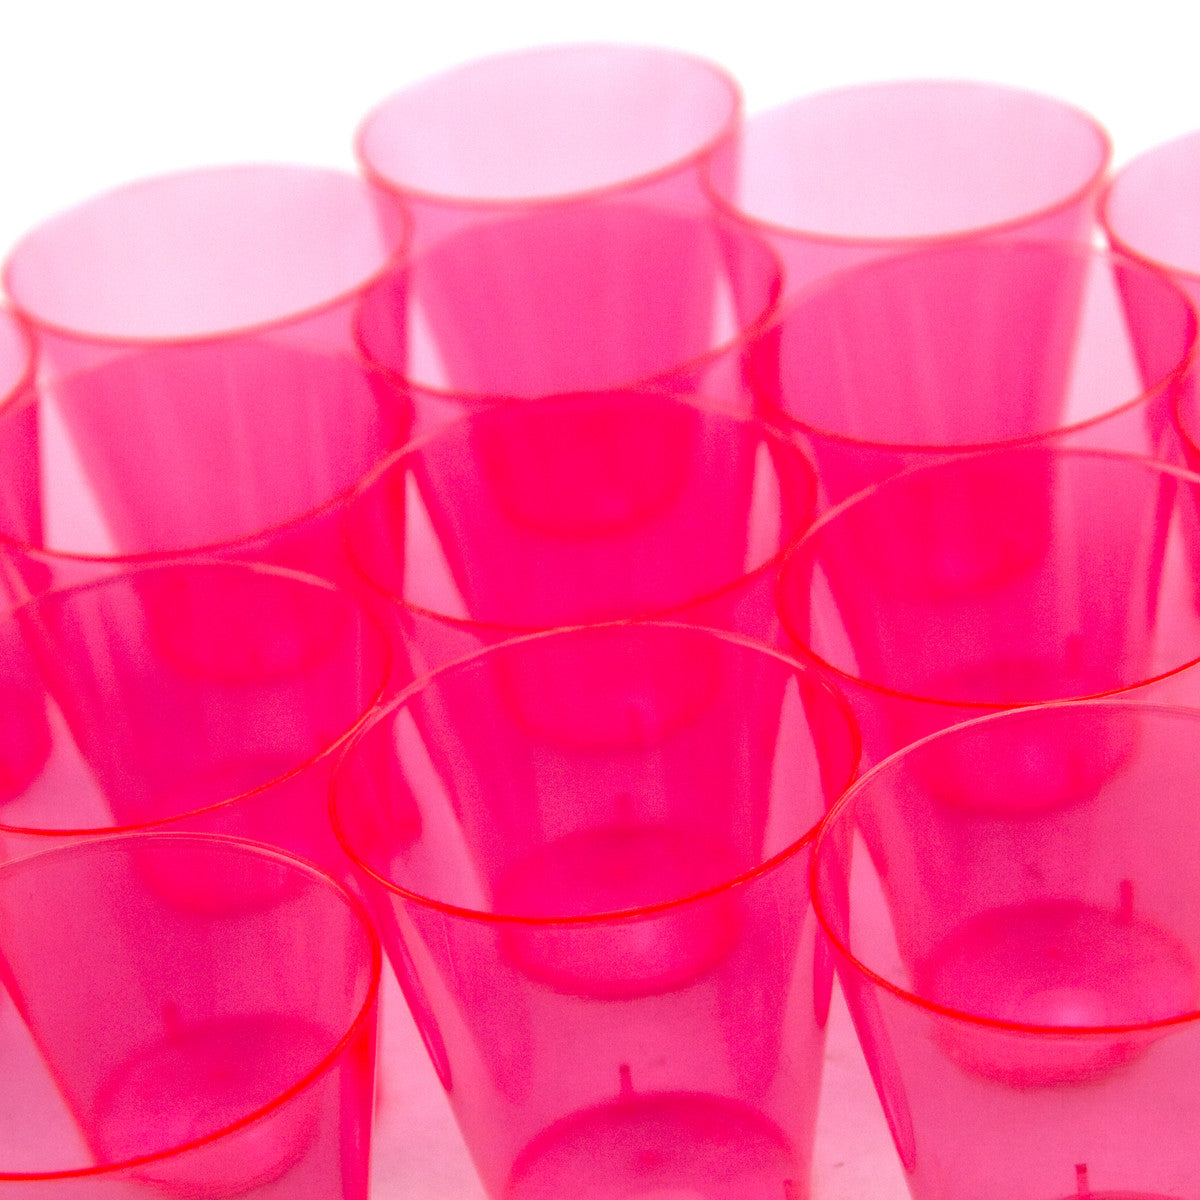 Neon Pink Plastic Shot Cups - 2 oz. - 50 pack